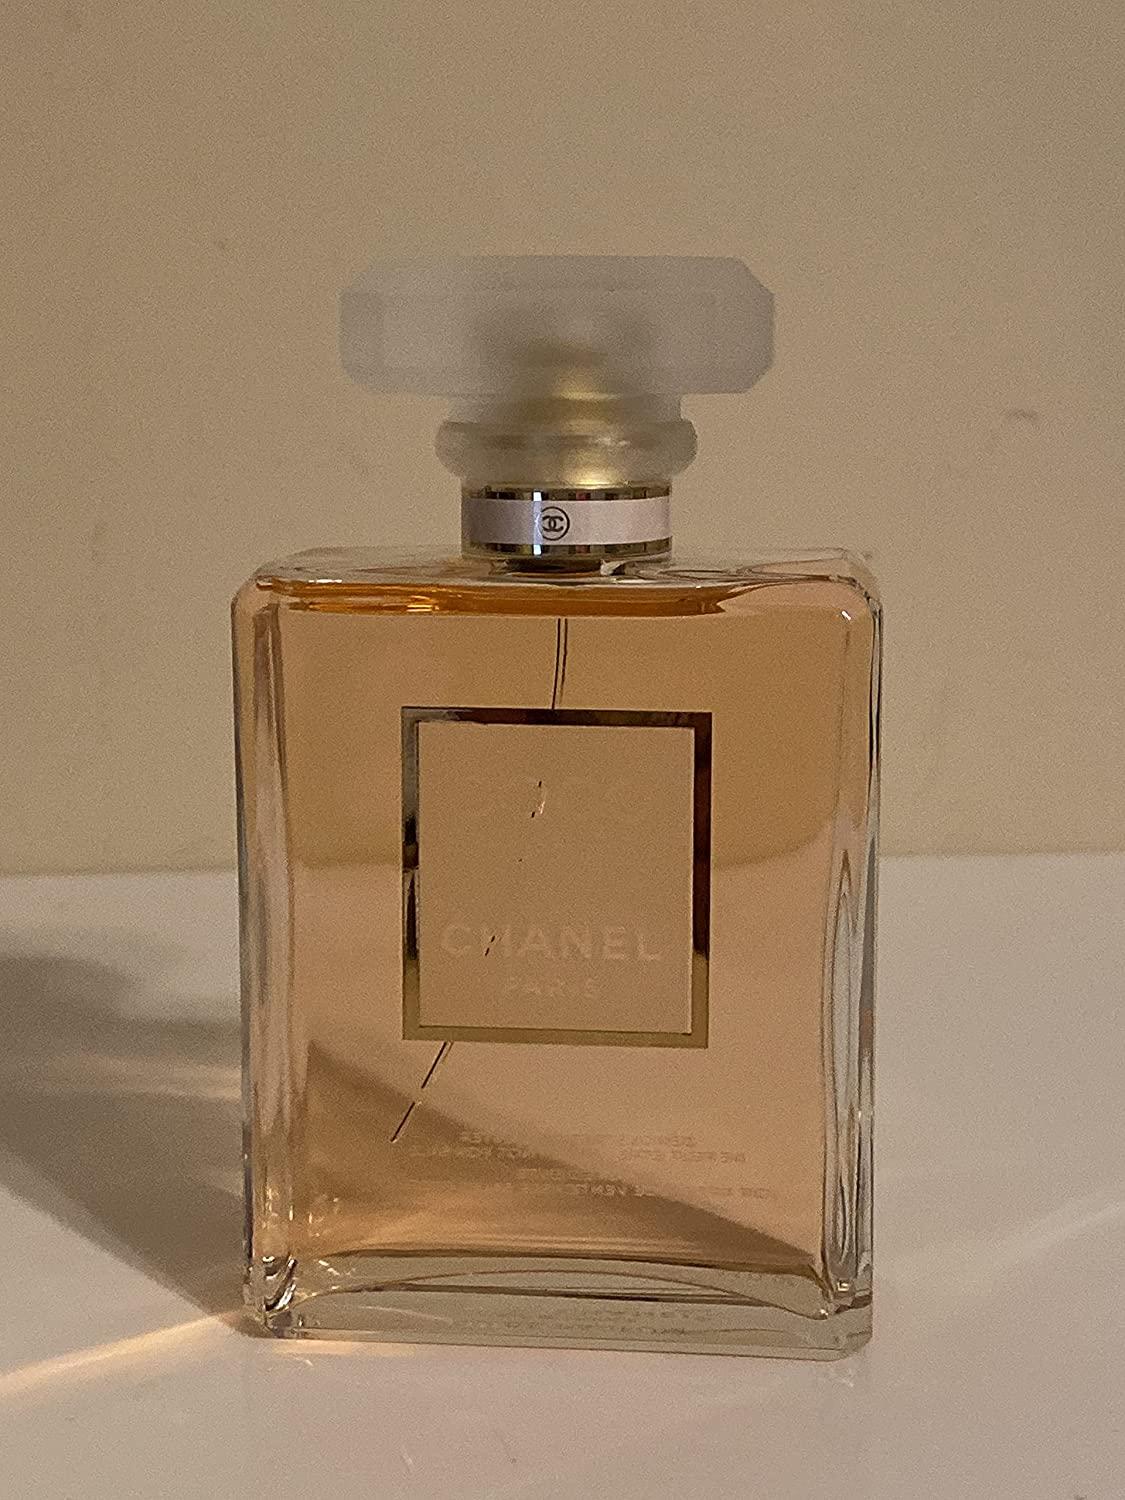 coco mademoiselle chanel edt 3.4